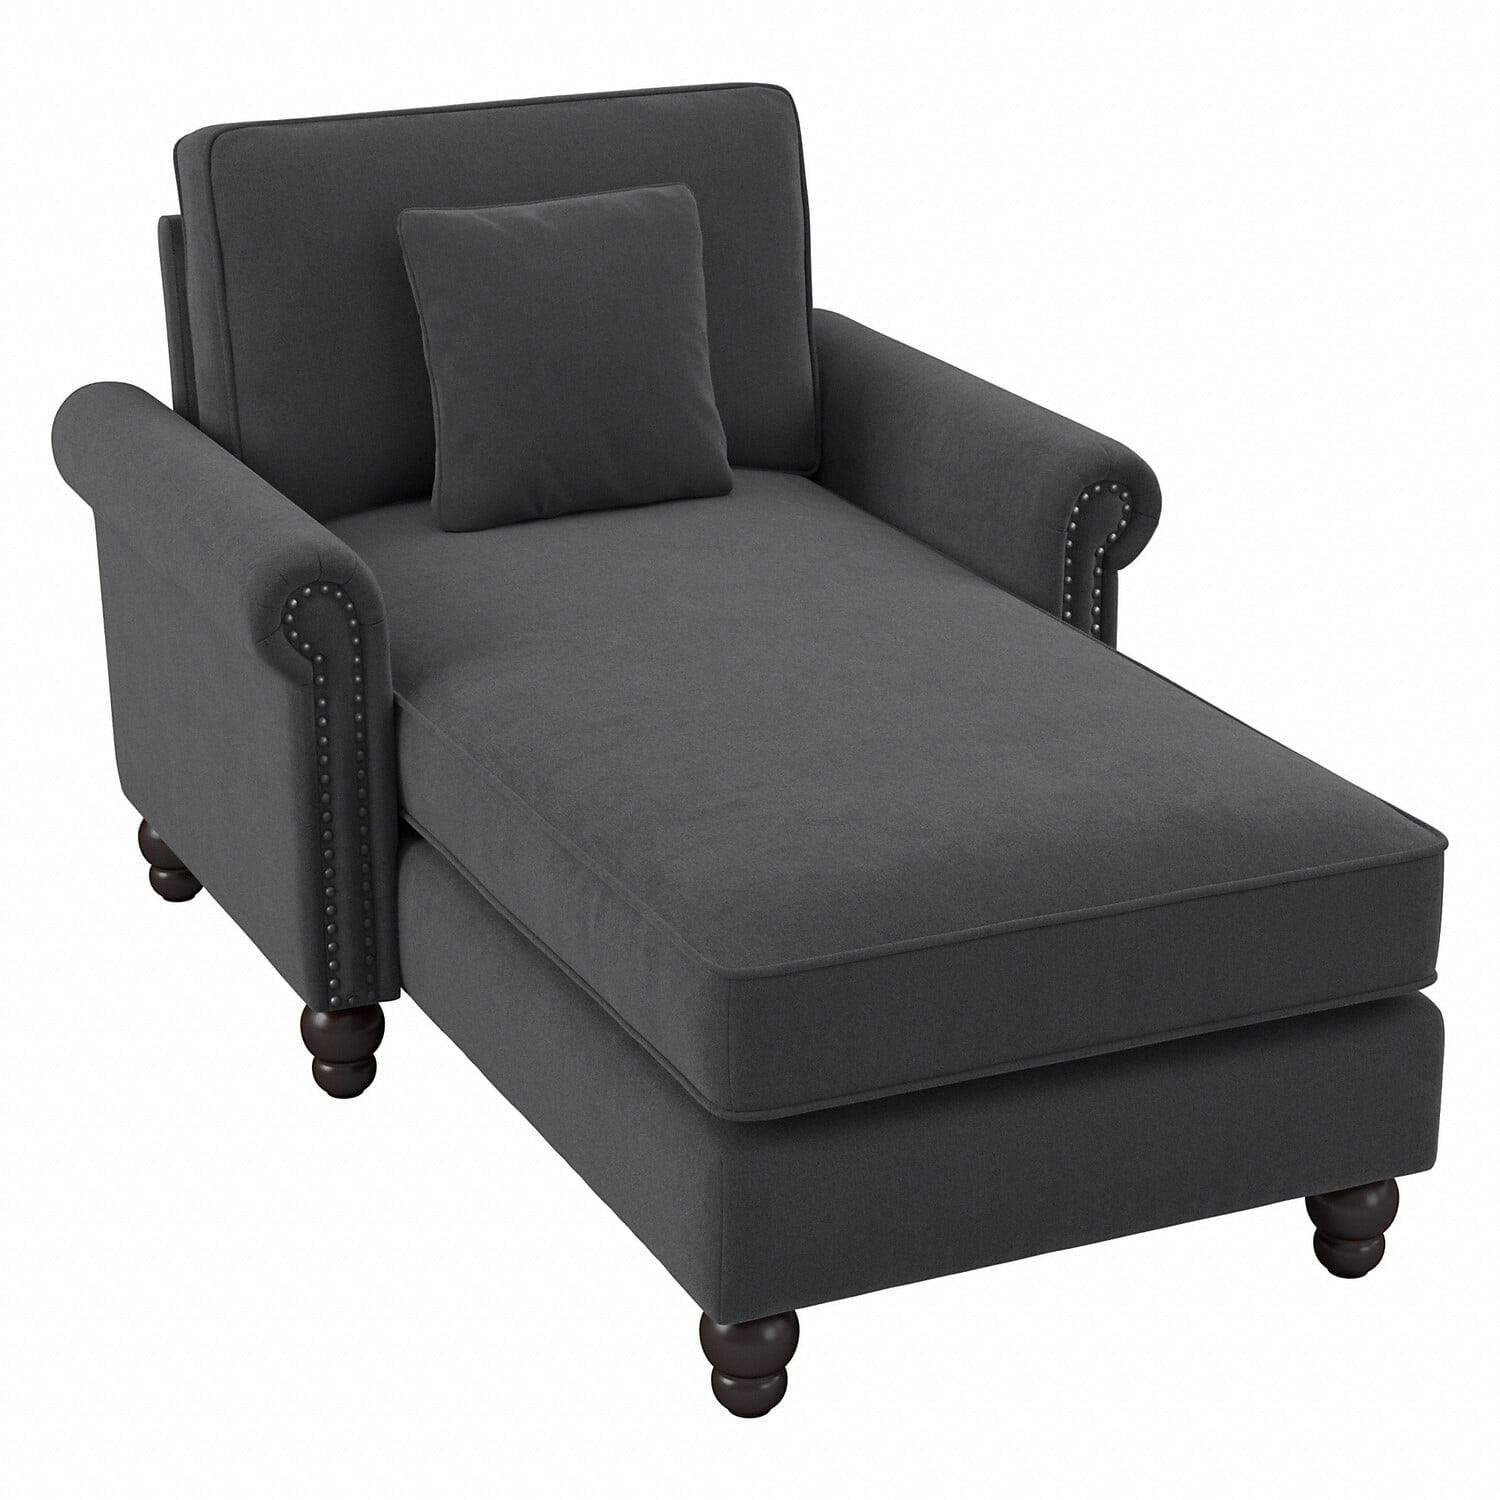 Charcoal Gray Herringbone Microfiber Chaise Lounge with Arms